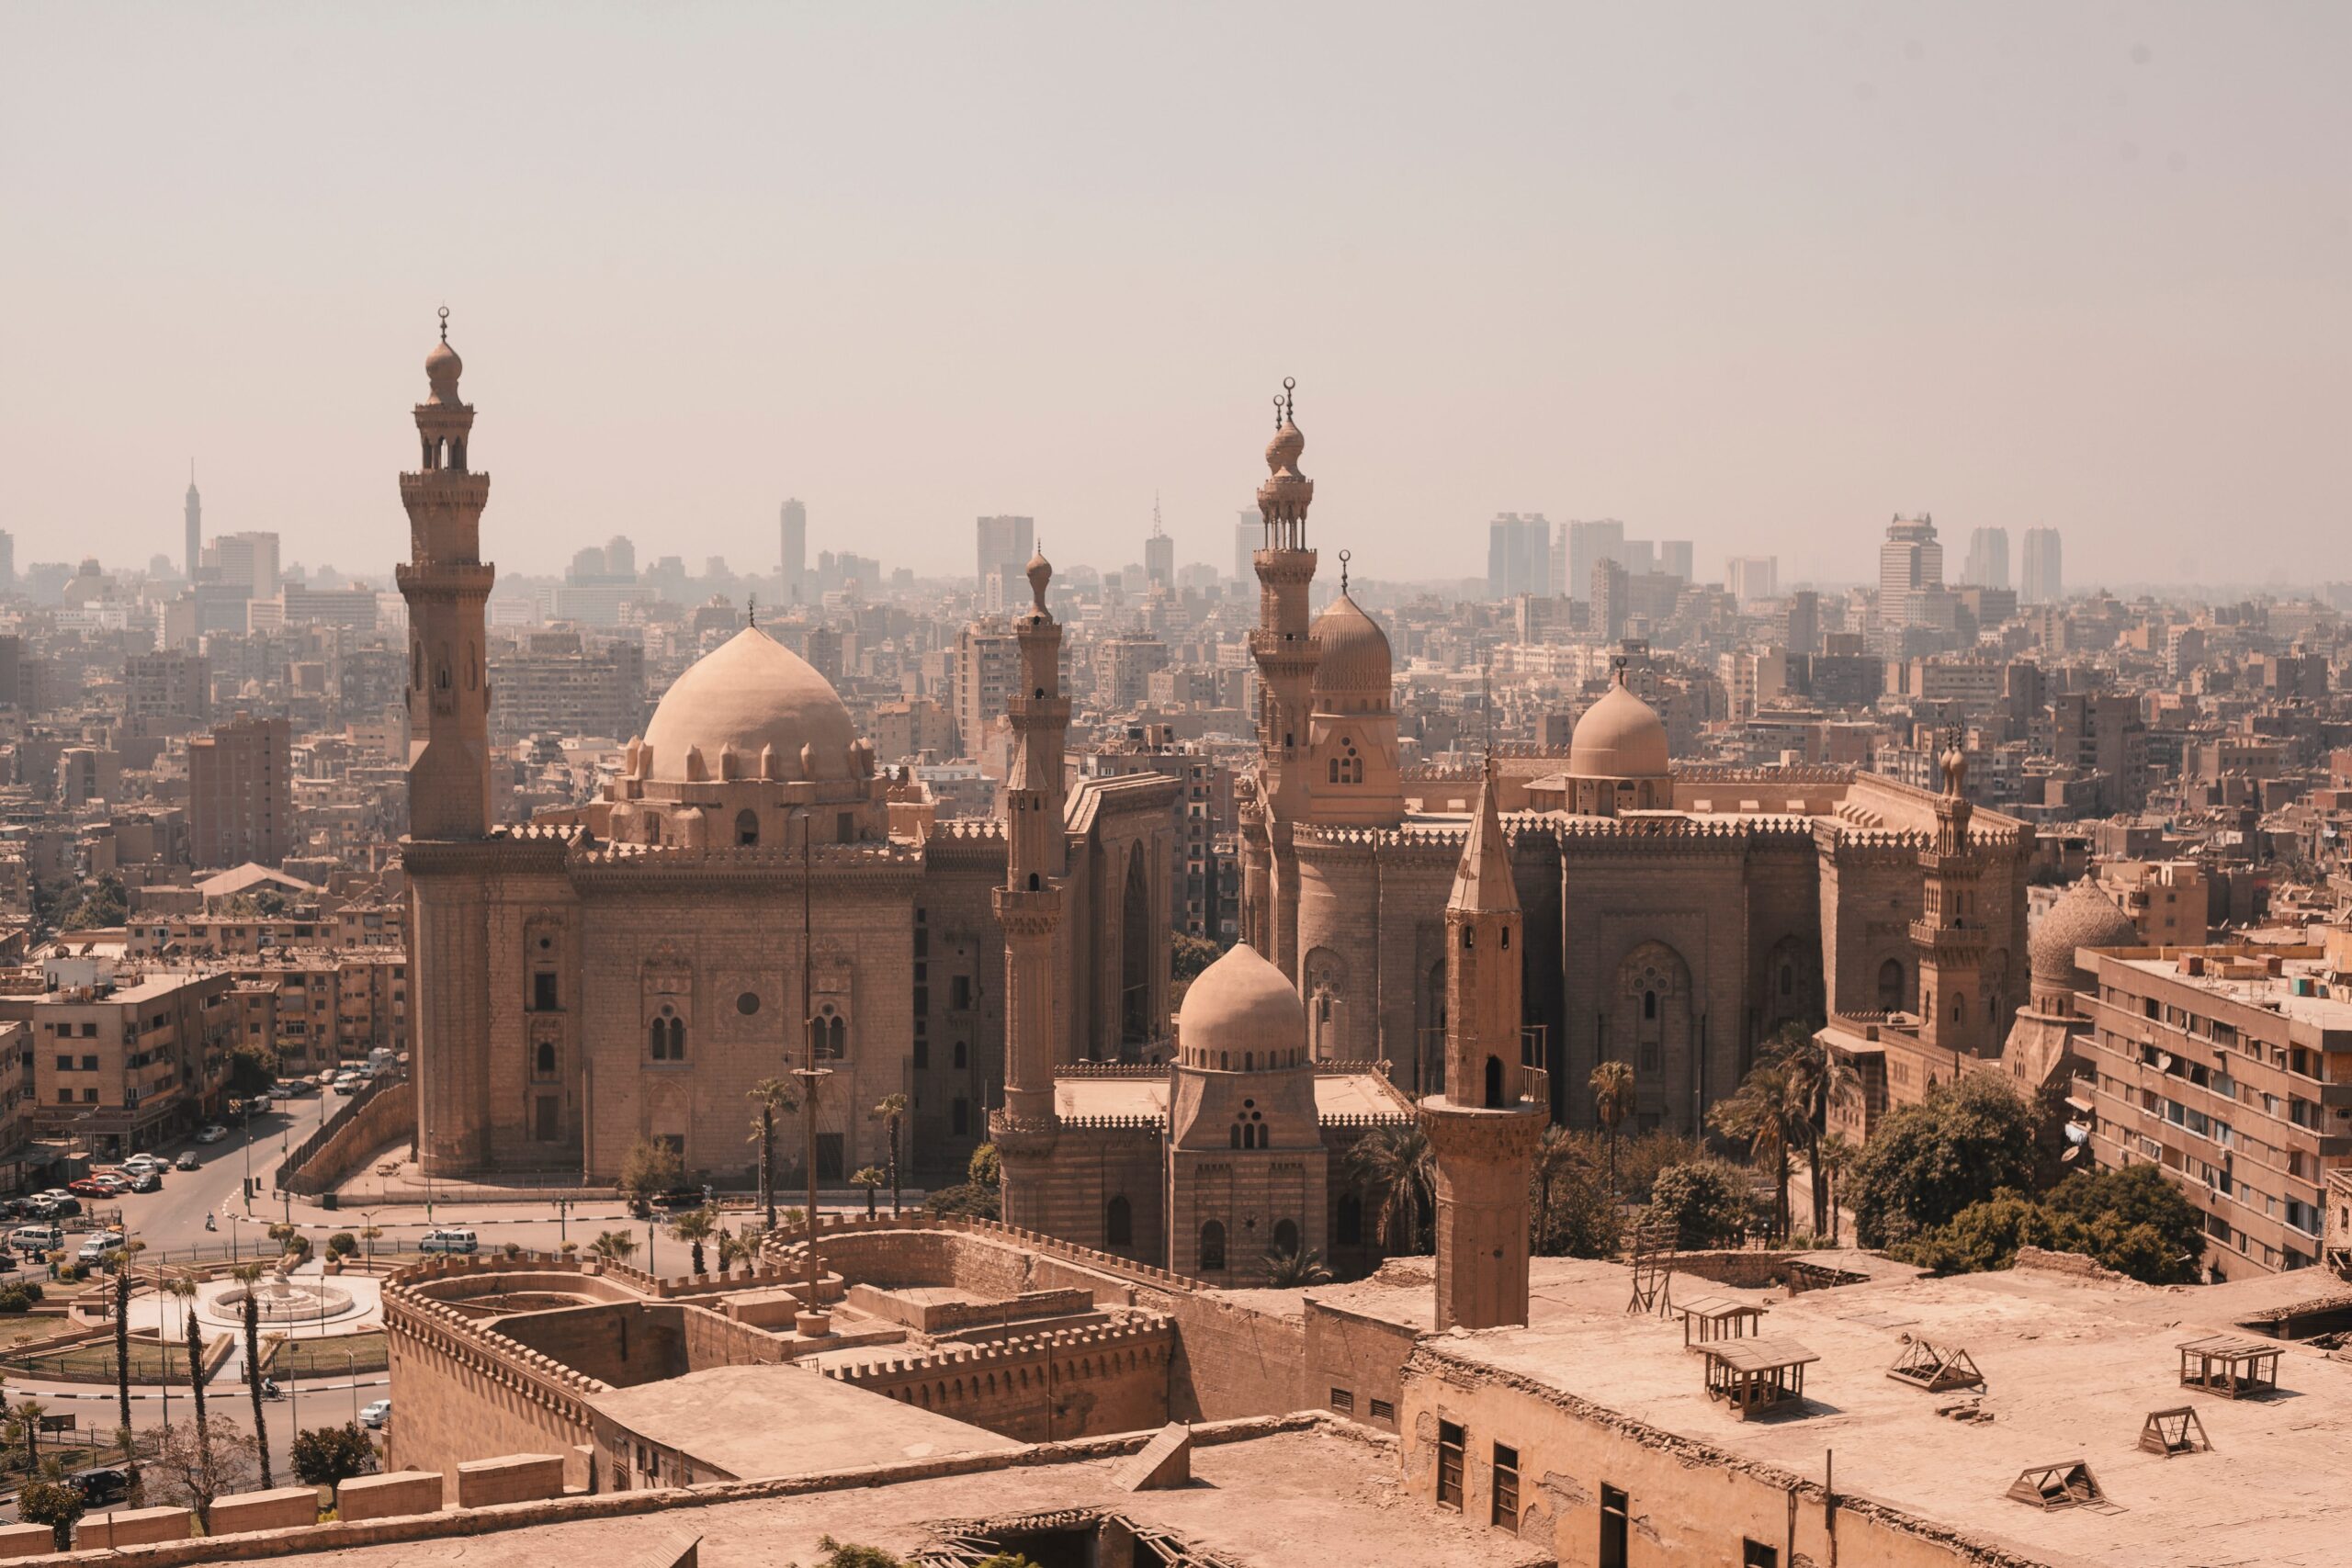 Cairo, Egypt - The Mosque of Rifai and Sultan Hassan is truly an architectural miracle